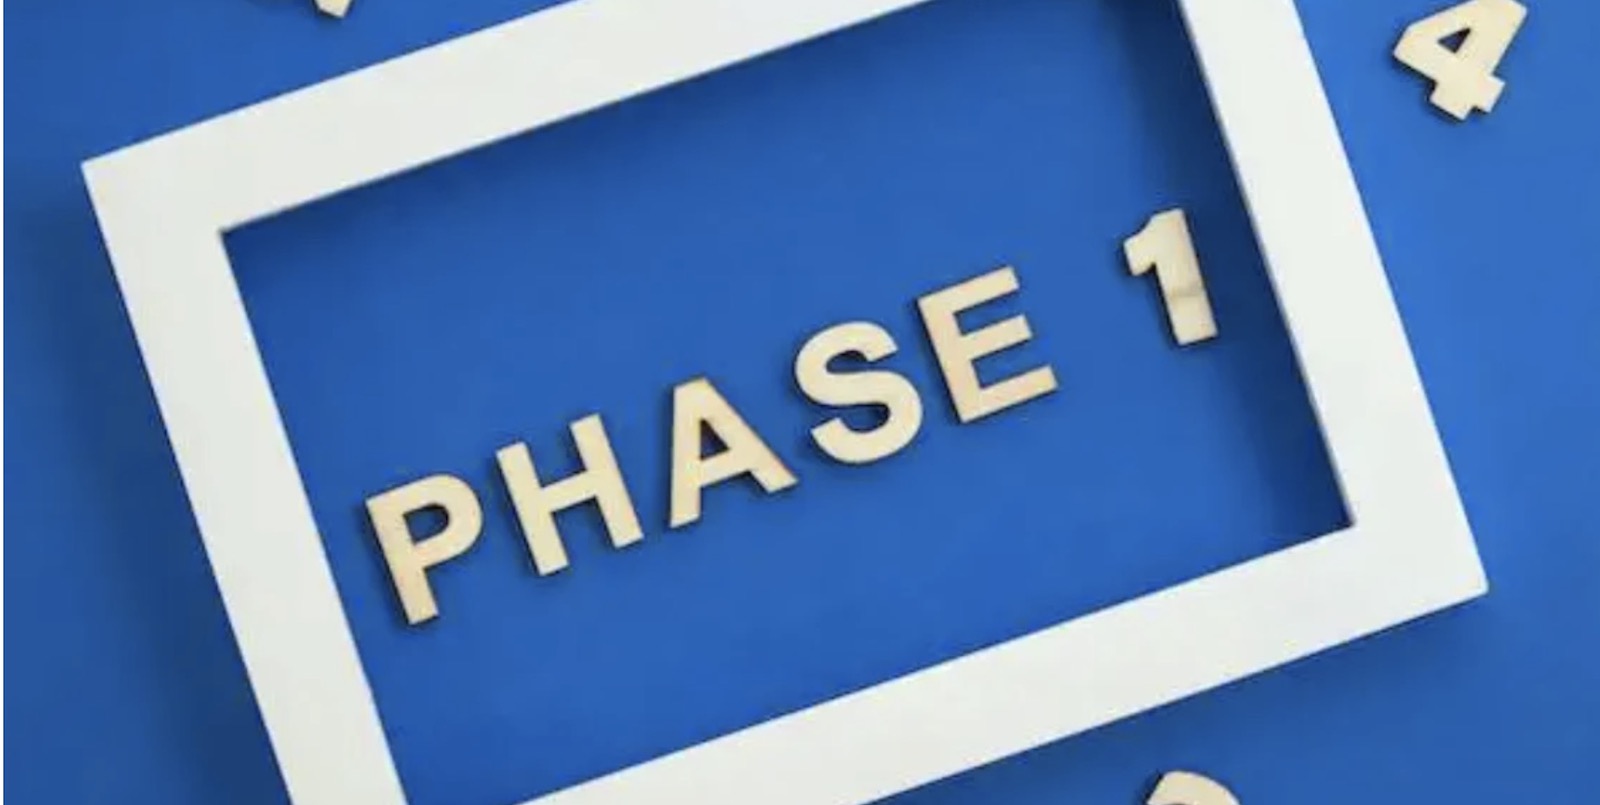 Words reading "Phase 1"